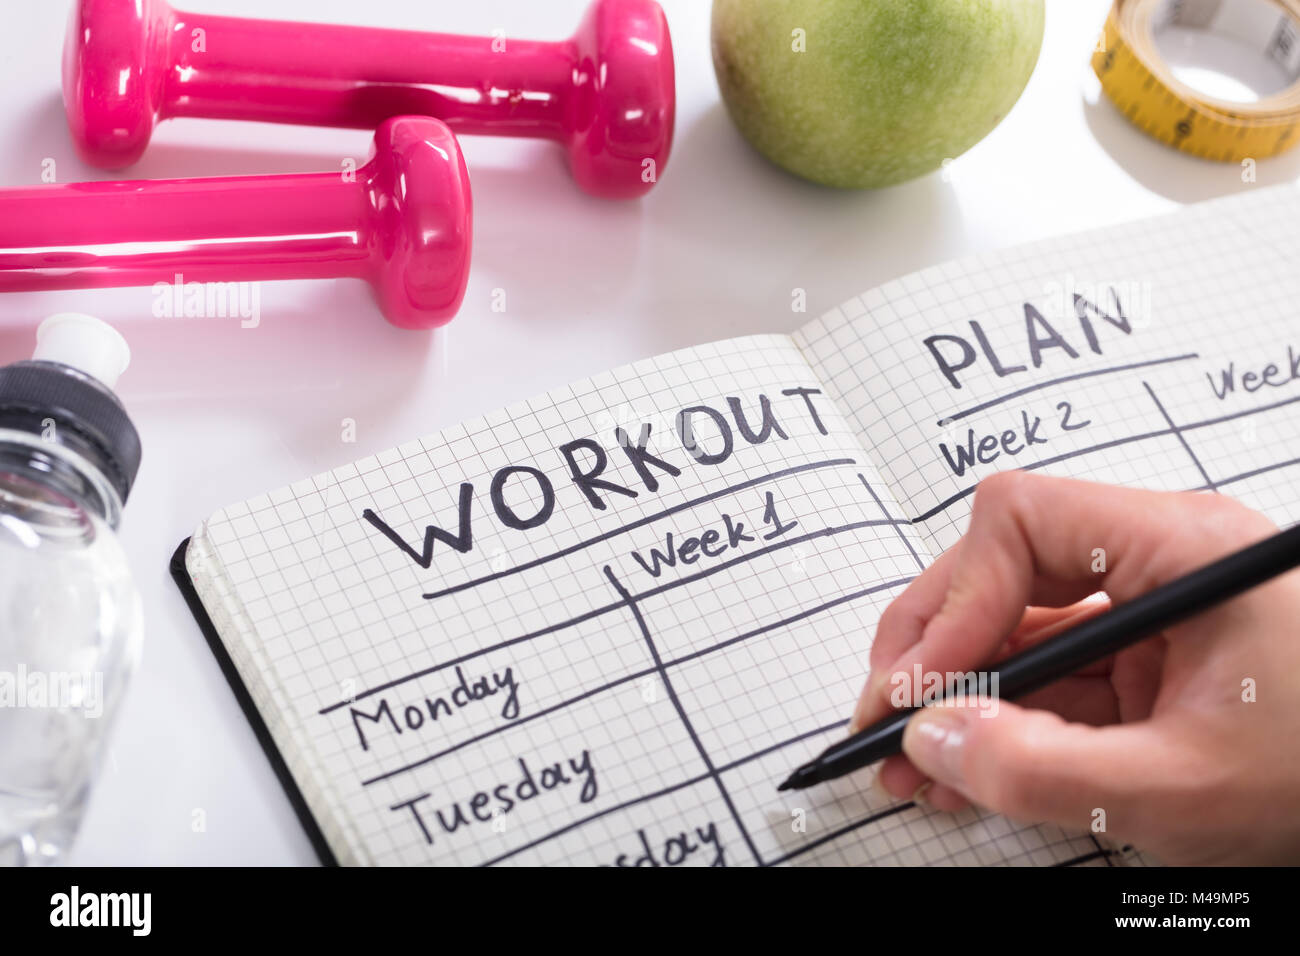 Woman Writing Workout Plan In Notebook At Wooden Desk Stock Photo